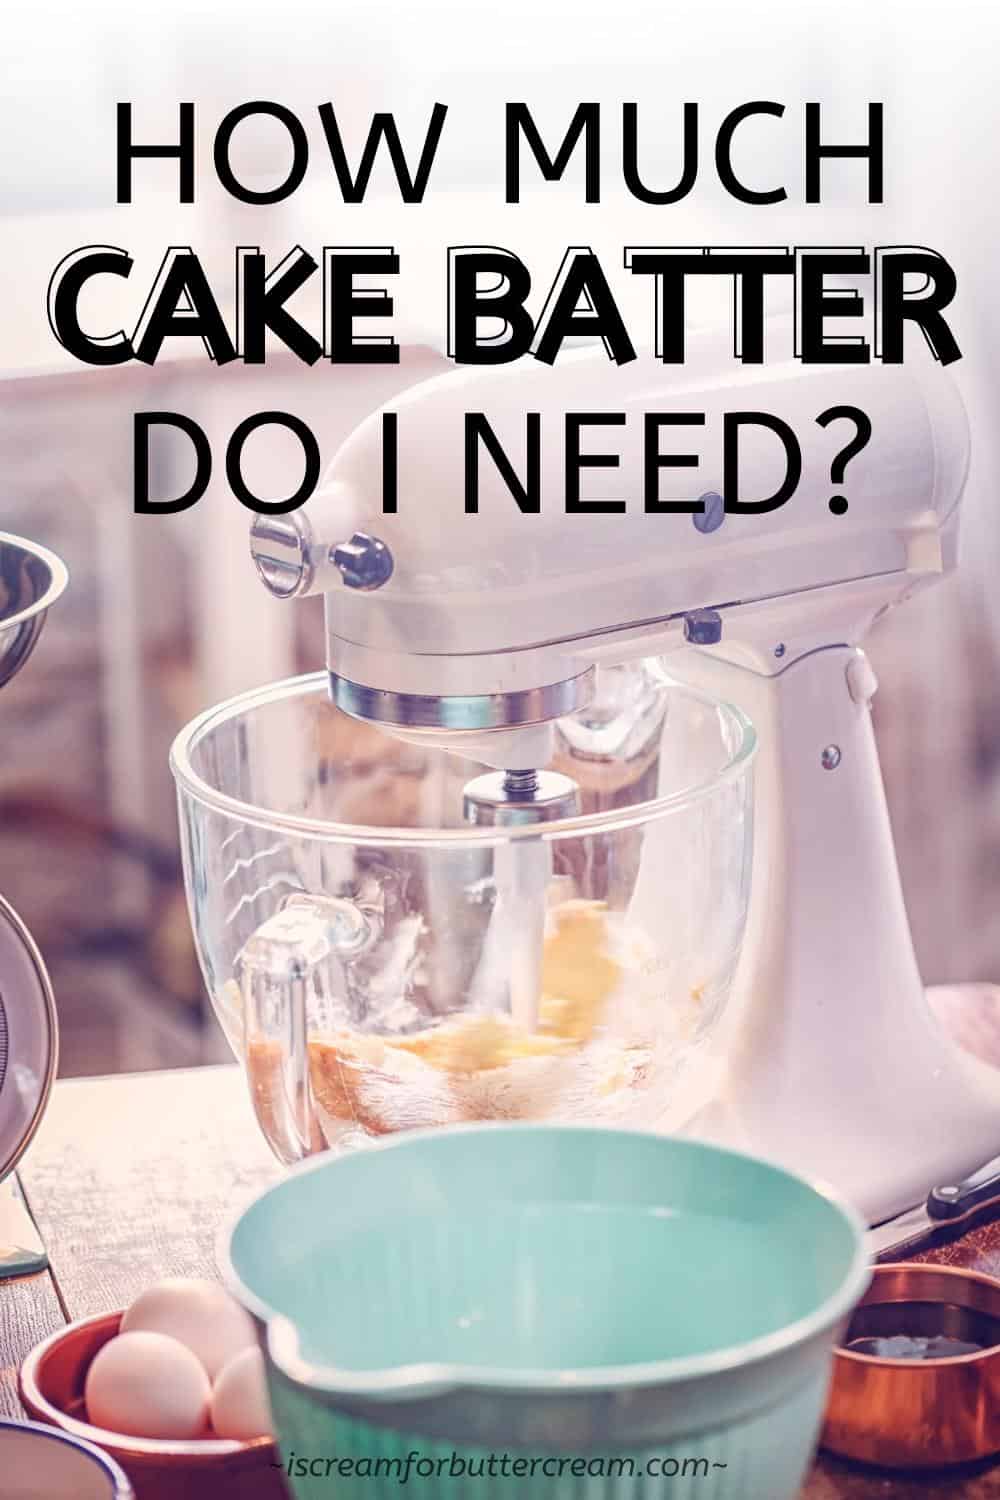 Pin for how much cake batter with mixer and text.